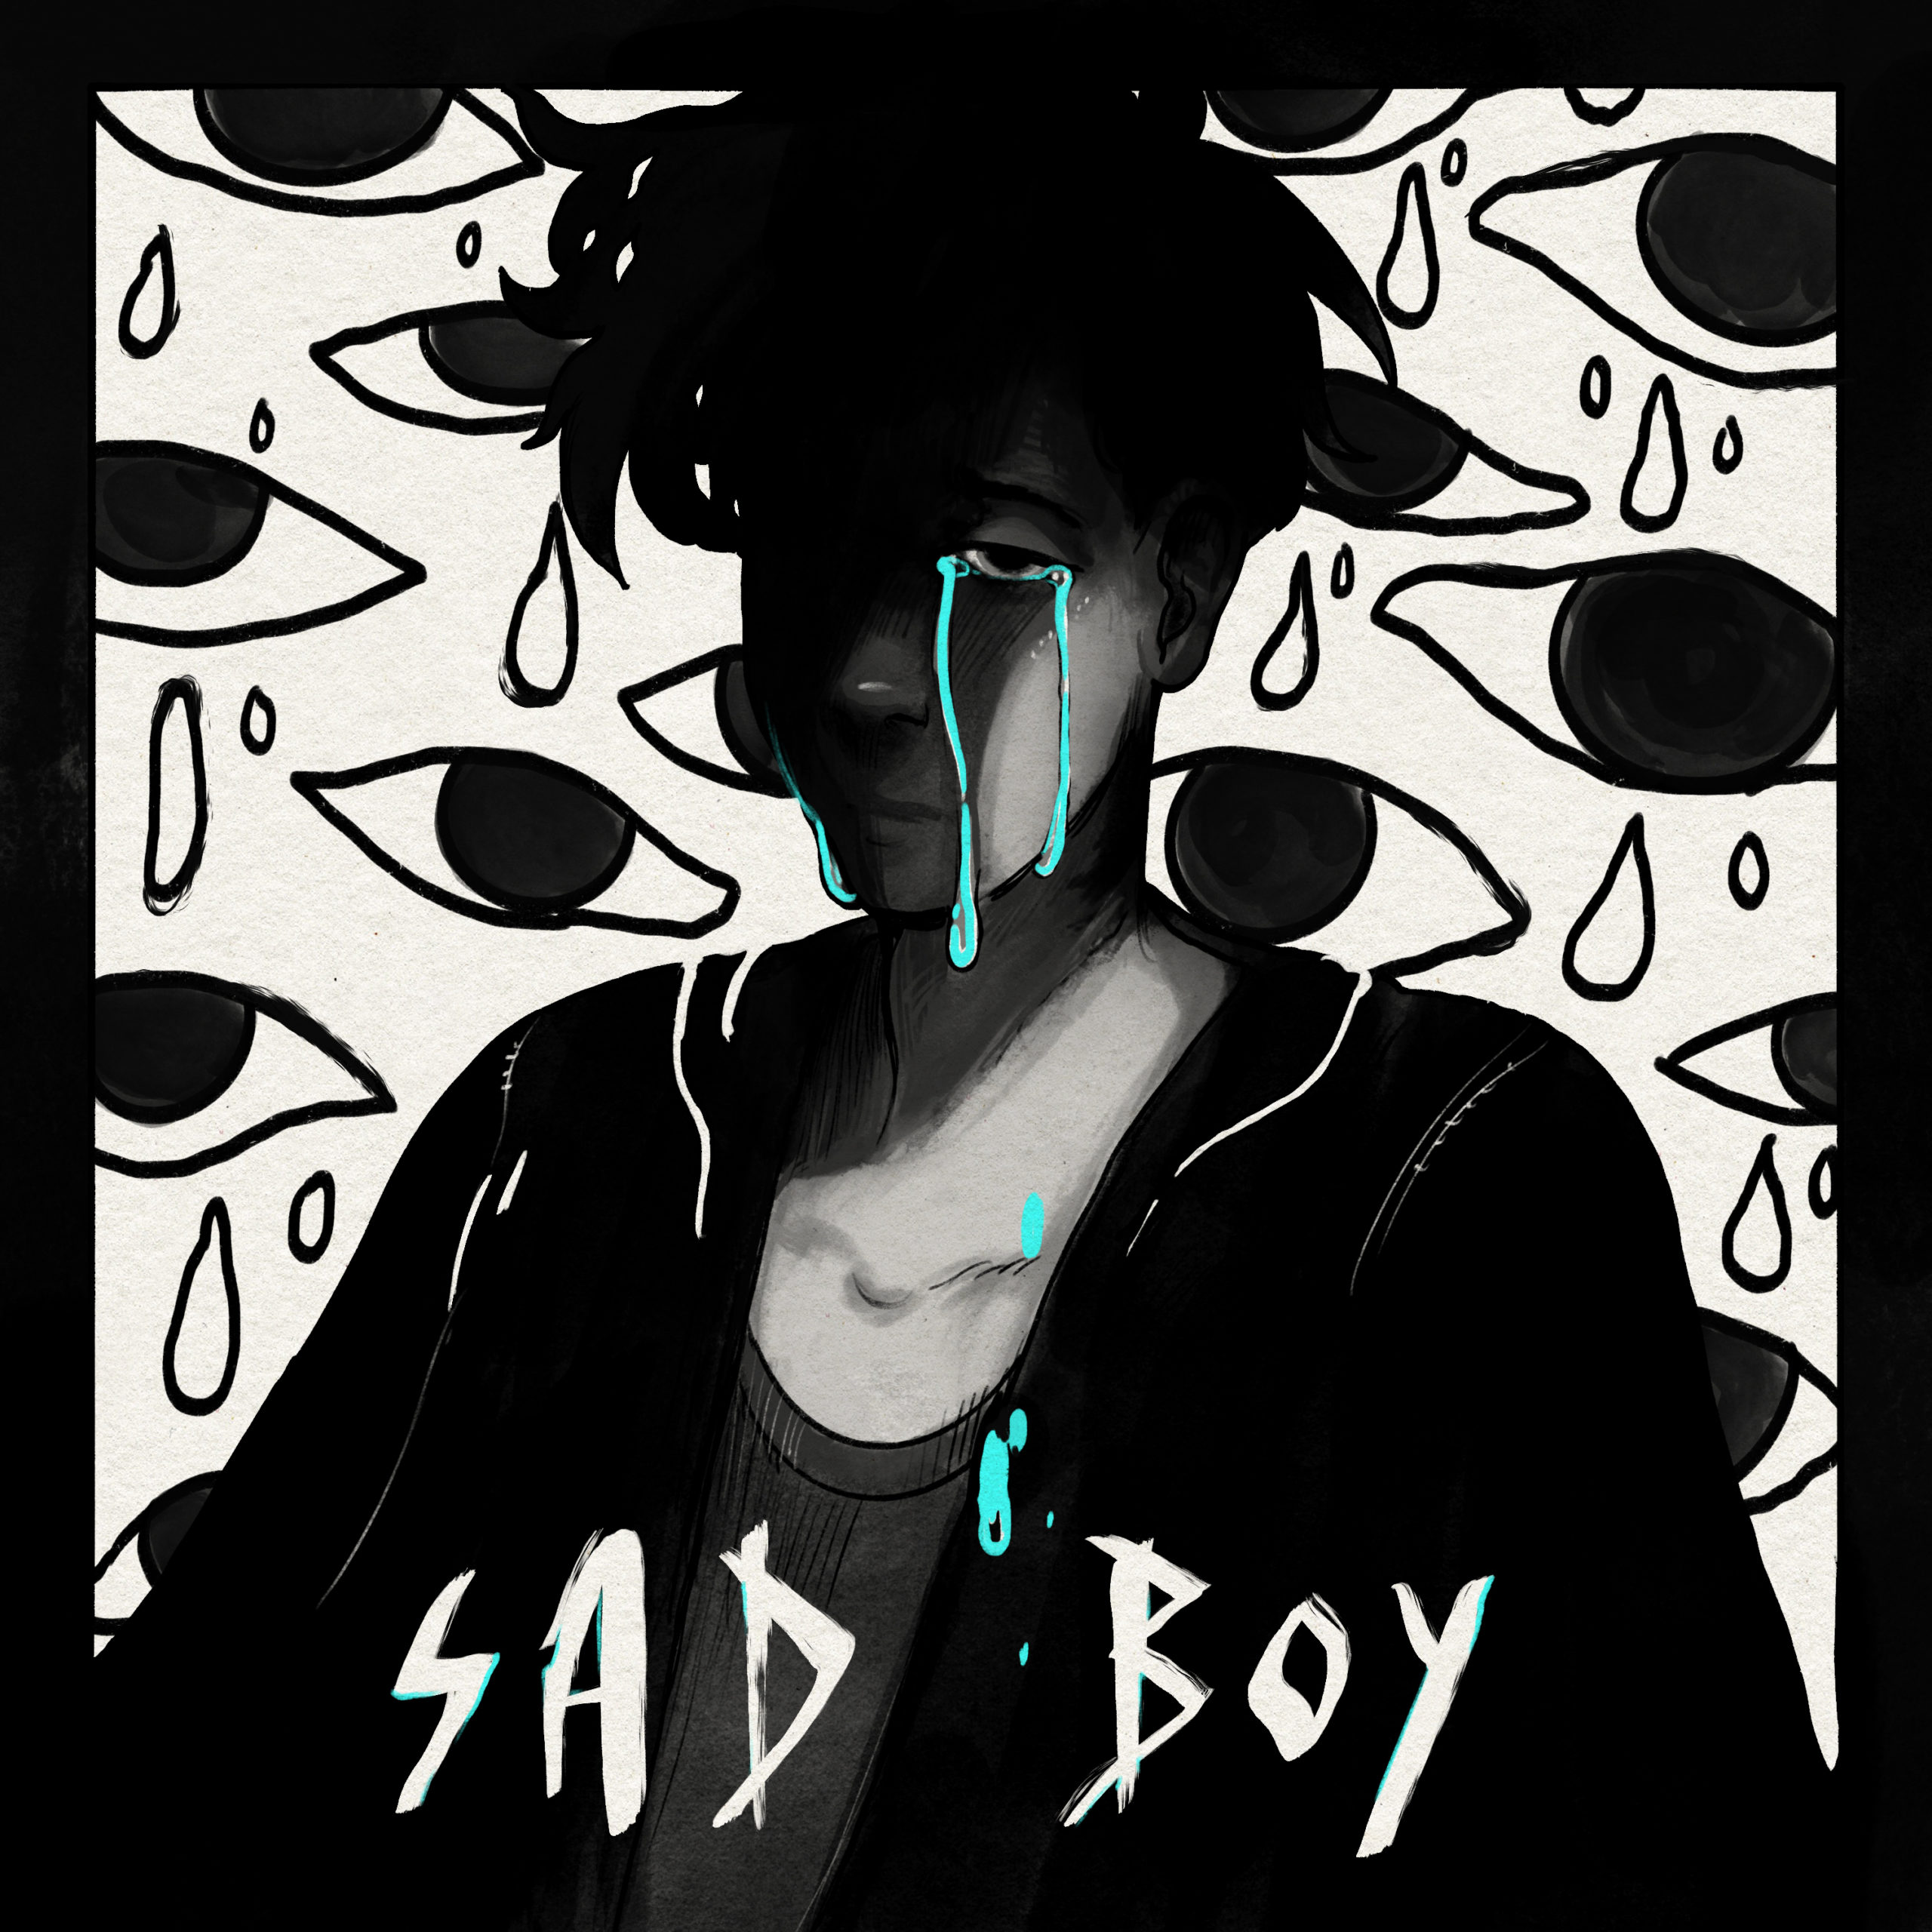 R3HAB, Ava Max, Jonas Blue & Kylie Cantrall team up on “Sad Boy” – 2nd track from R3HAB’s upcoming album (OUT NOW)